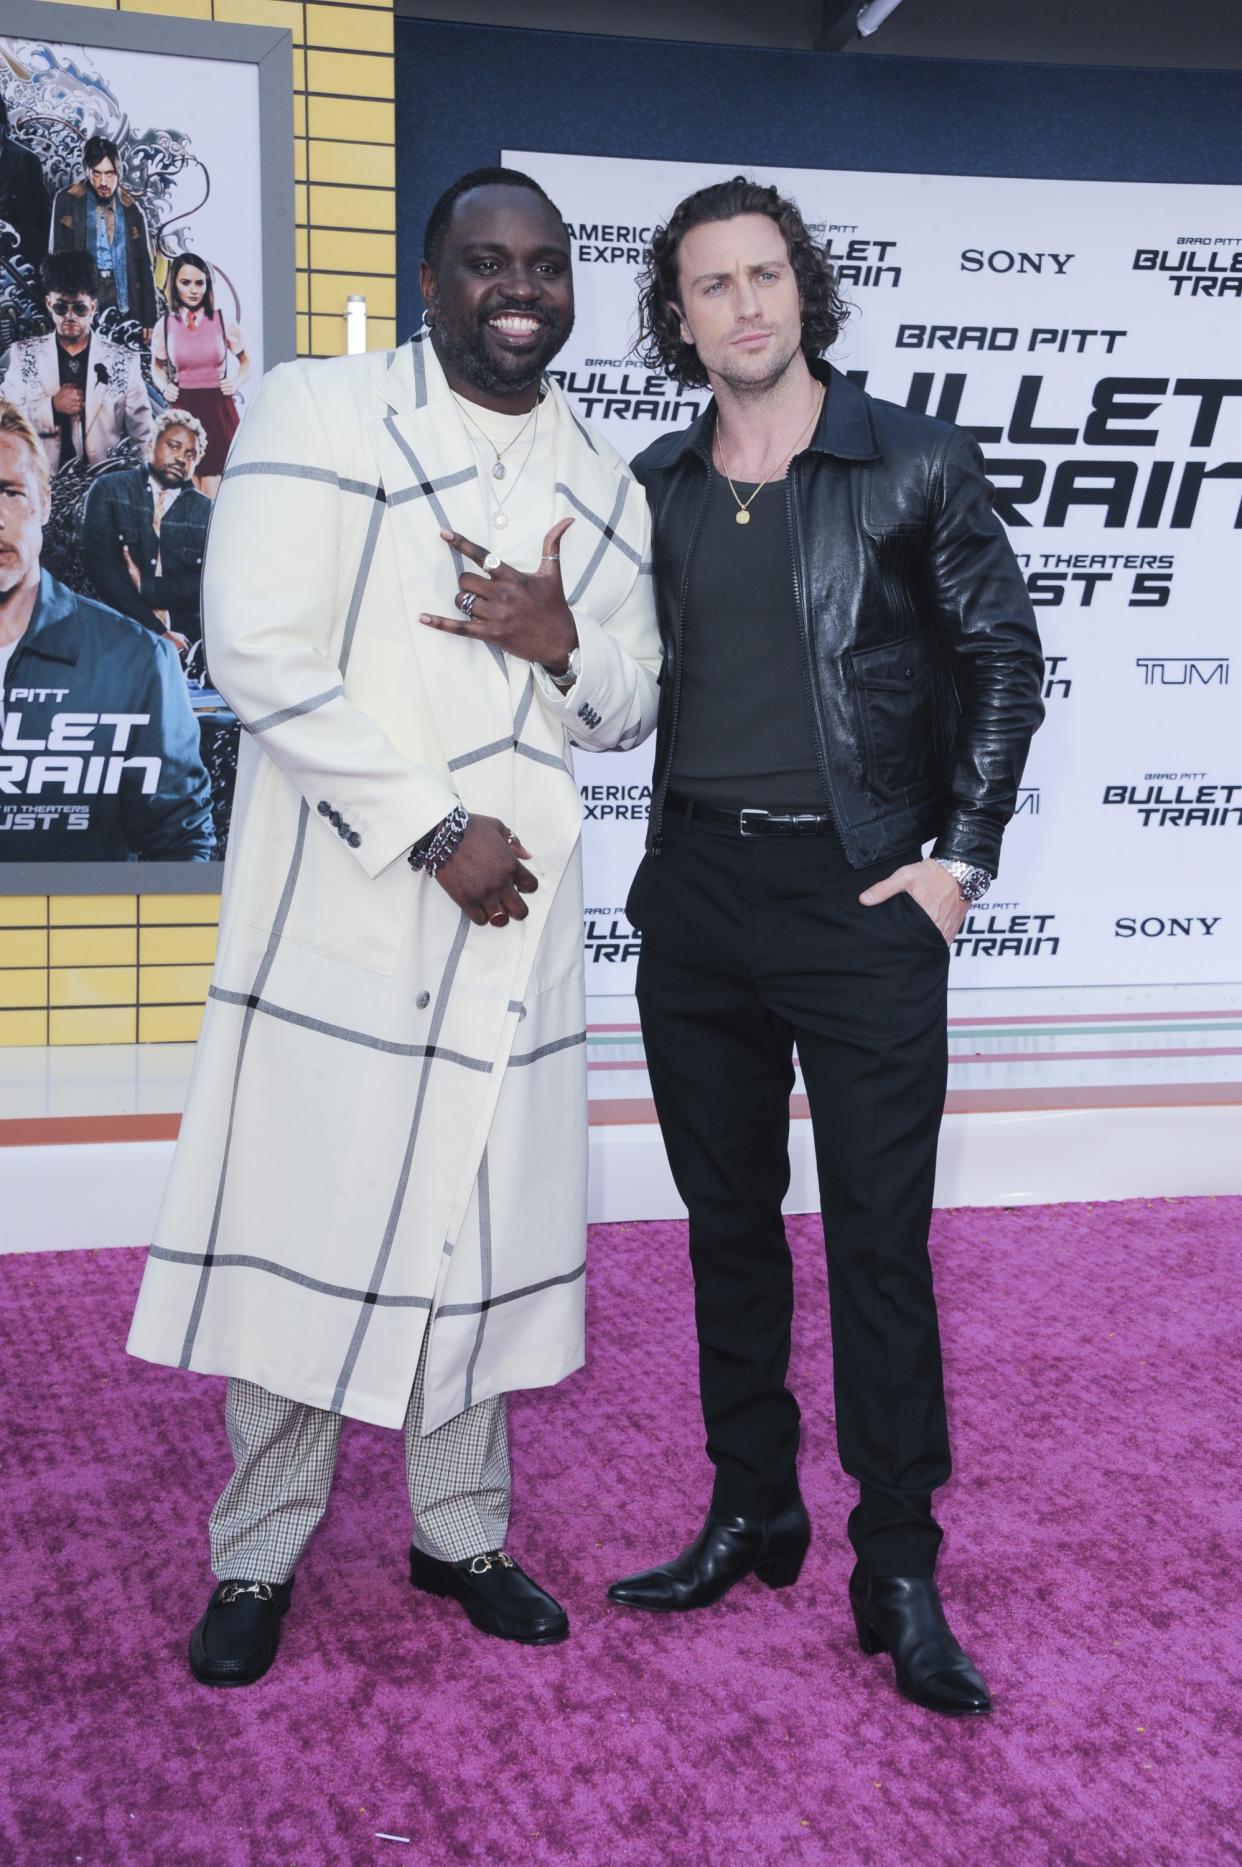 Brian Tyree Henry and Aaron Taylor Johnson at the premiere of “Bullet Train” in Los Angeles, Calif. on Aug. 1, 2022. - Credit: Everett Collection